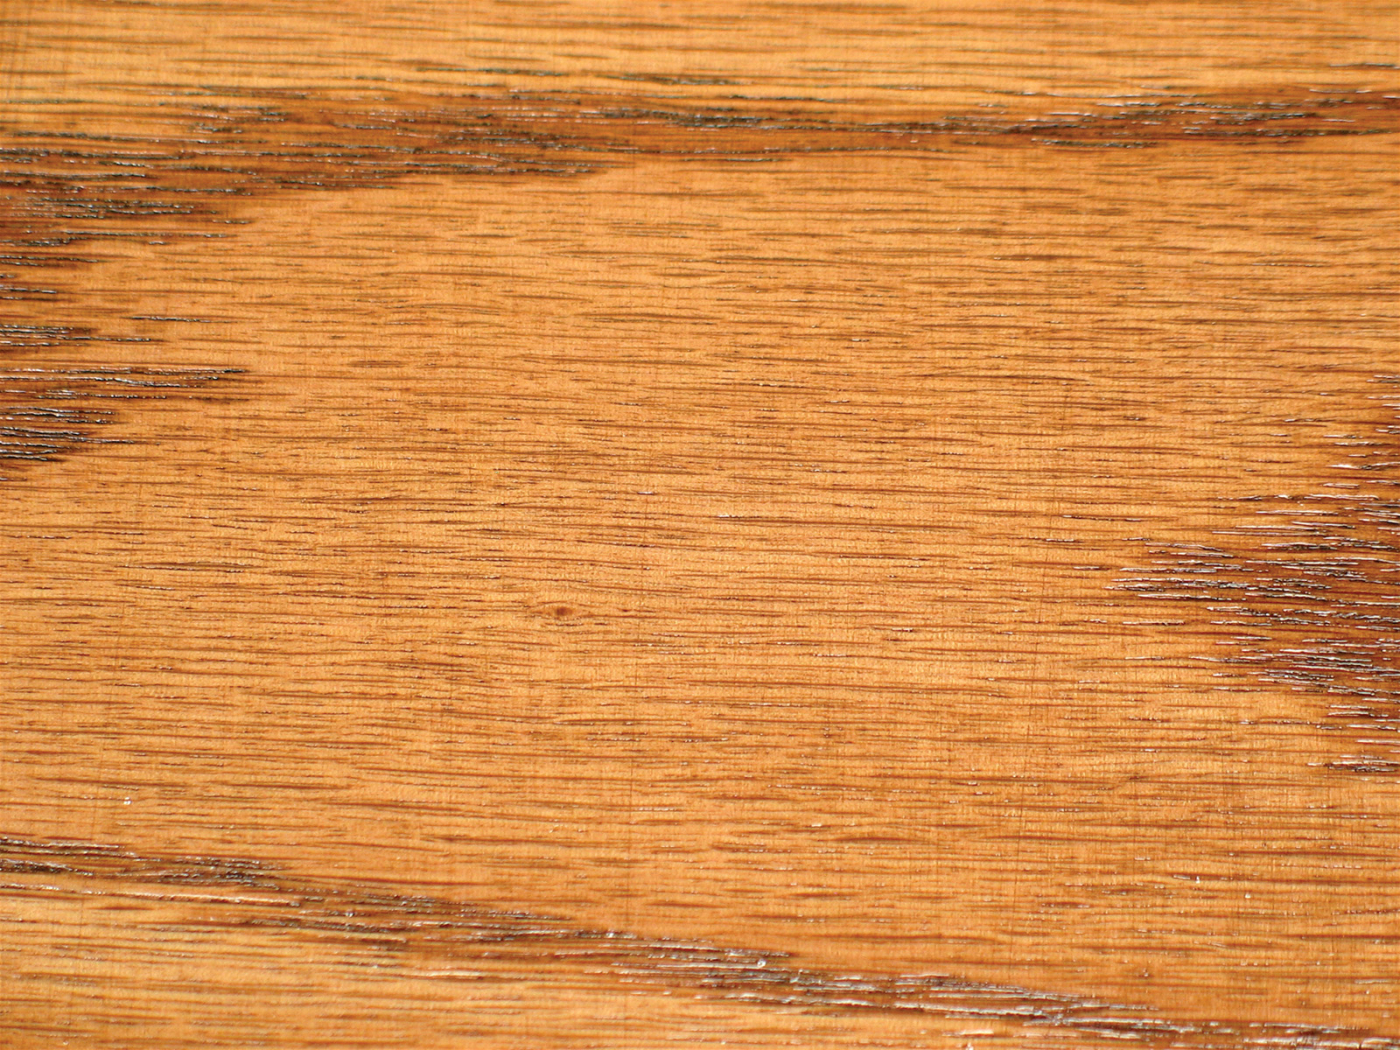 Using Mineral Spirits to Show Wood Grain 